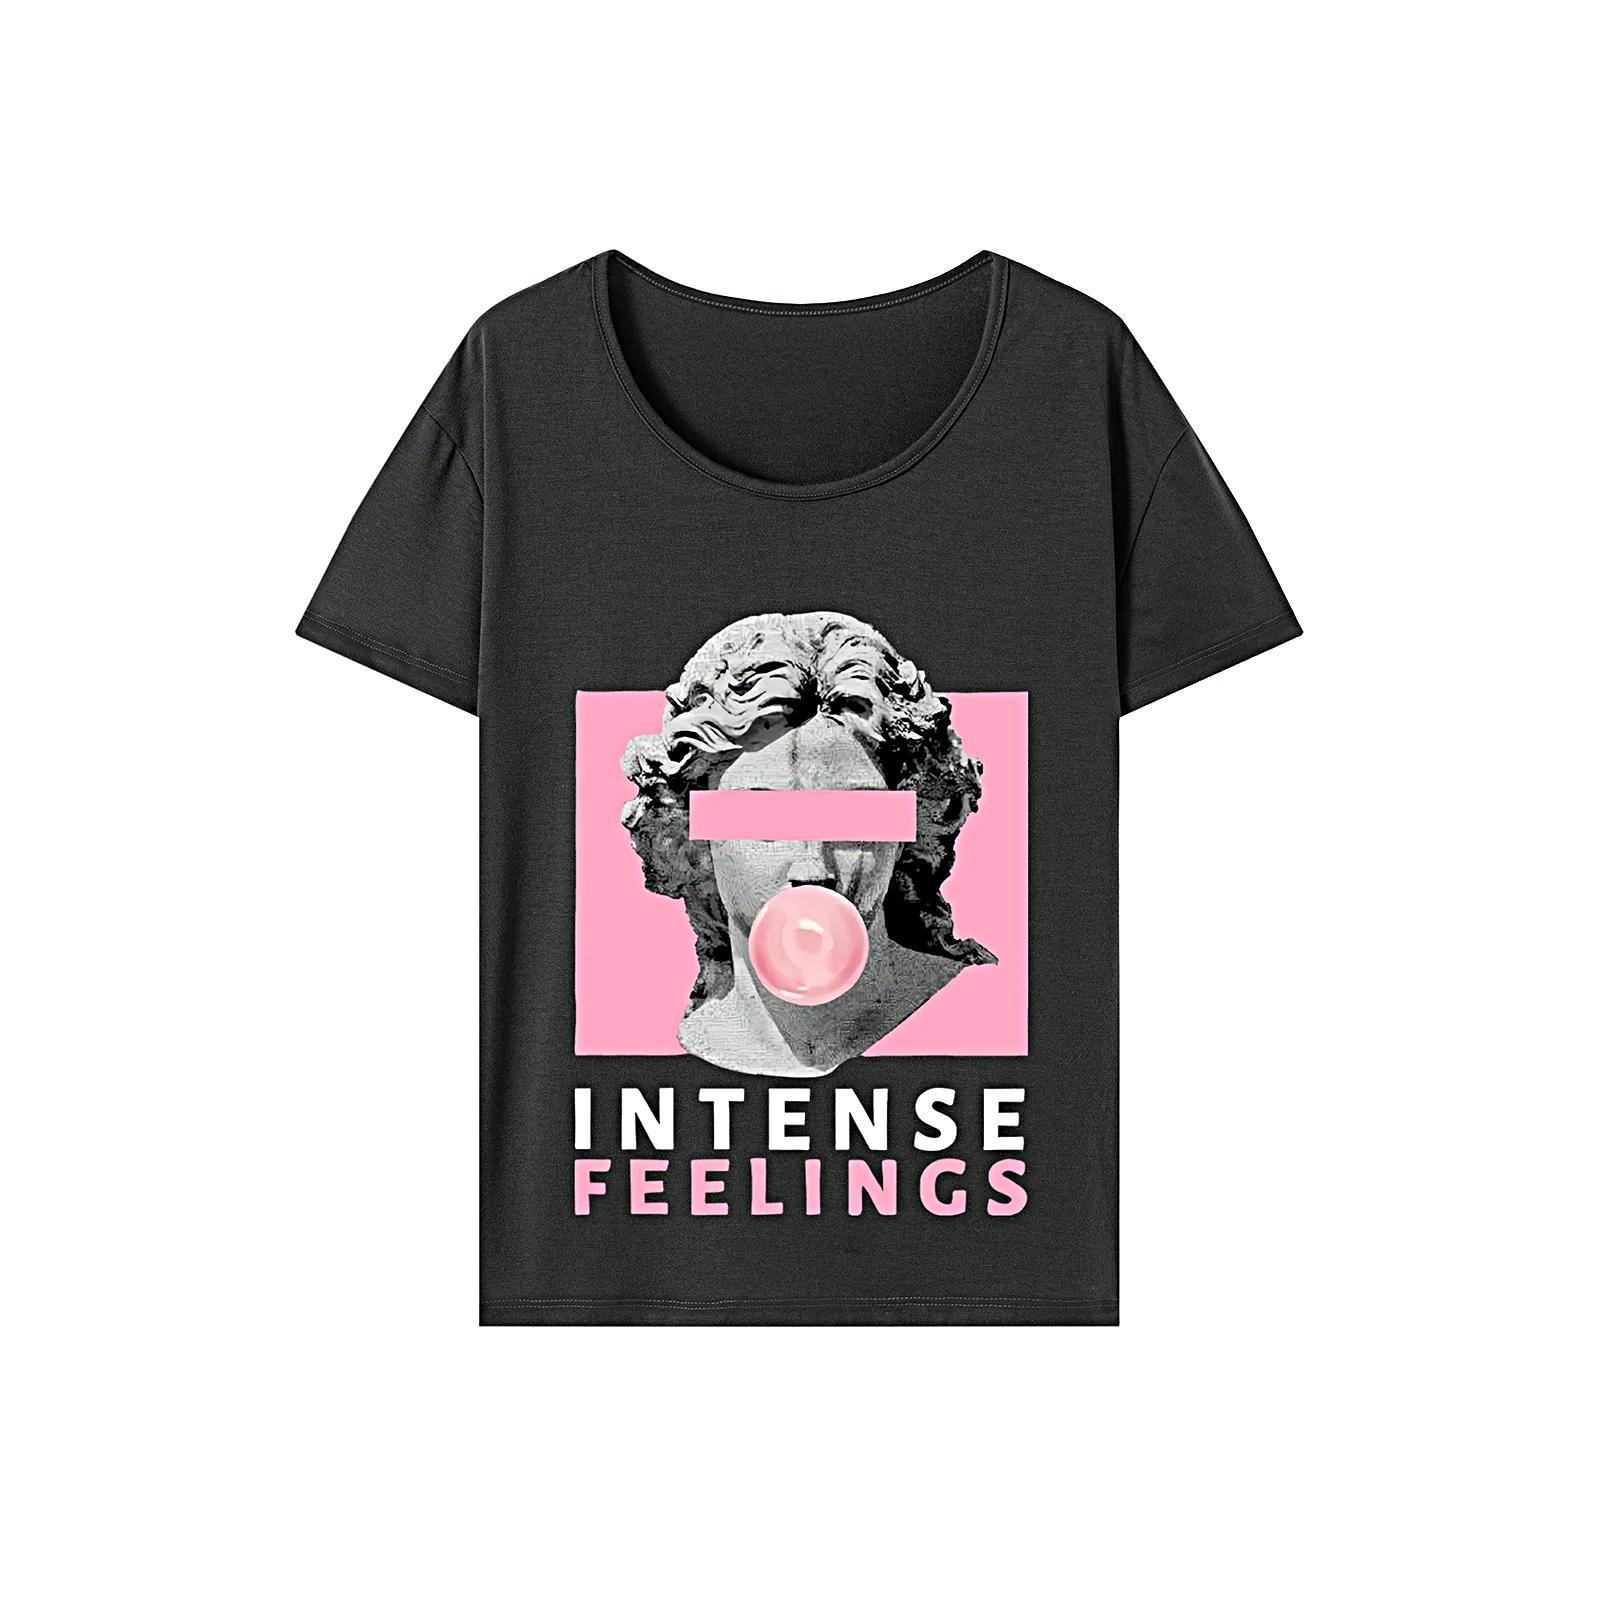 Womens T Shirt Summer Fashion Soft Crew Neck Tee for Vacation Commuting Work M